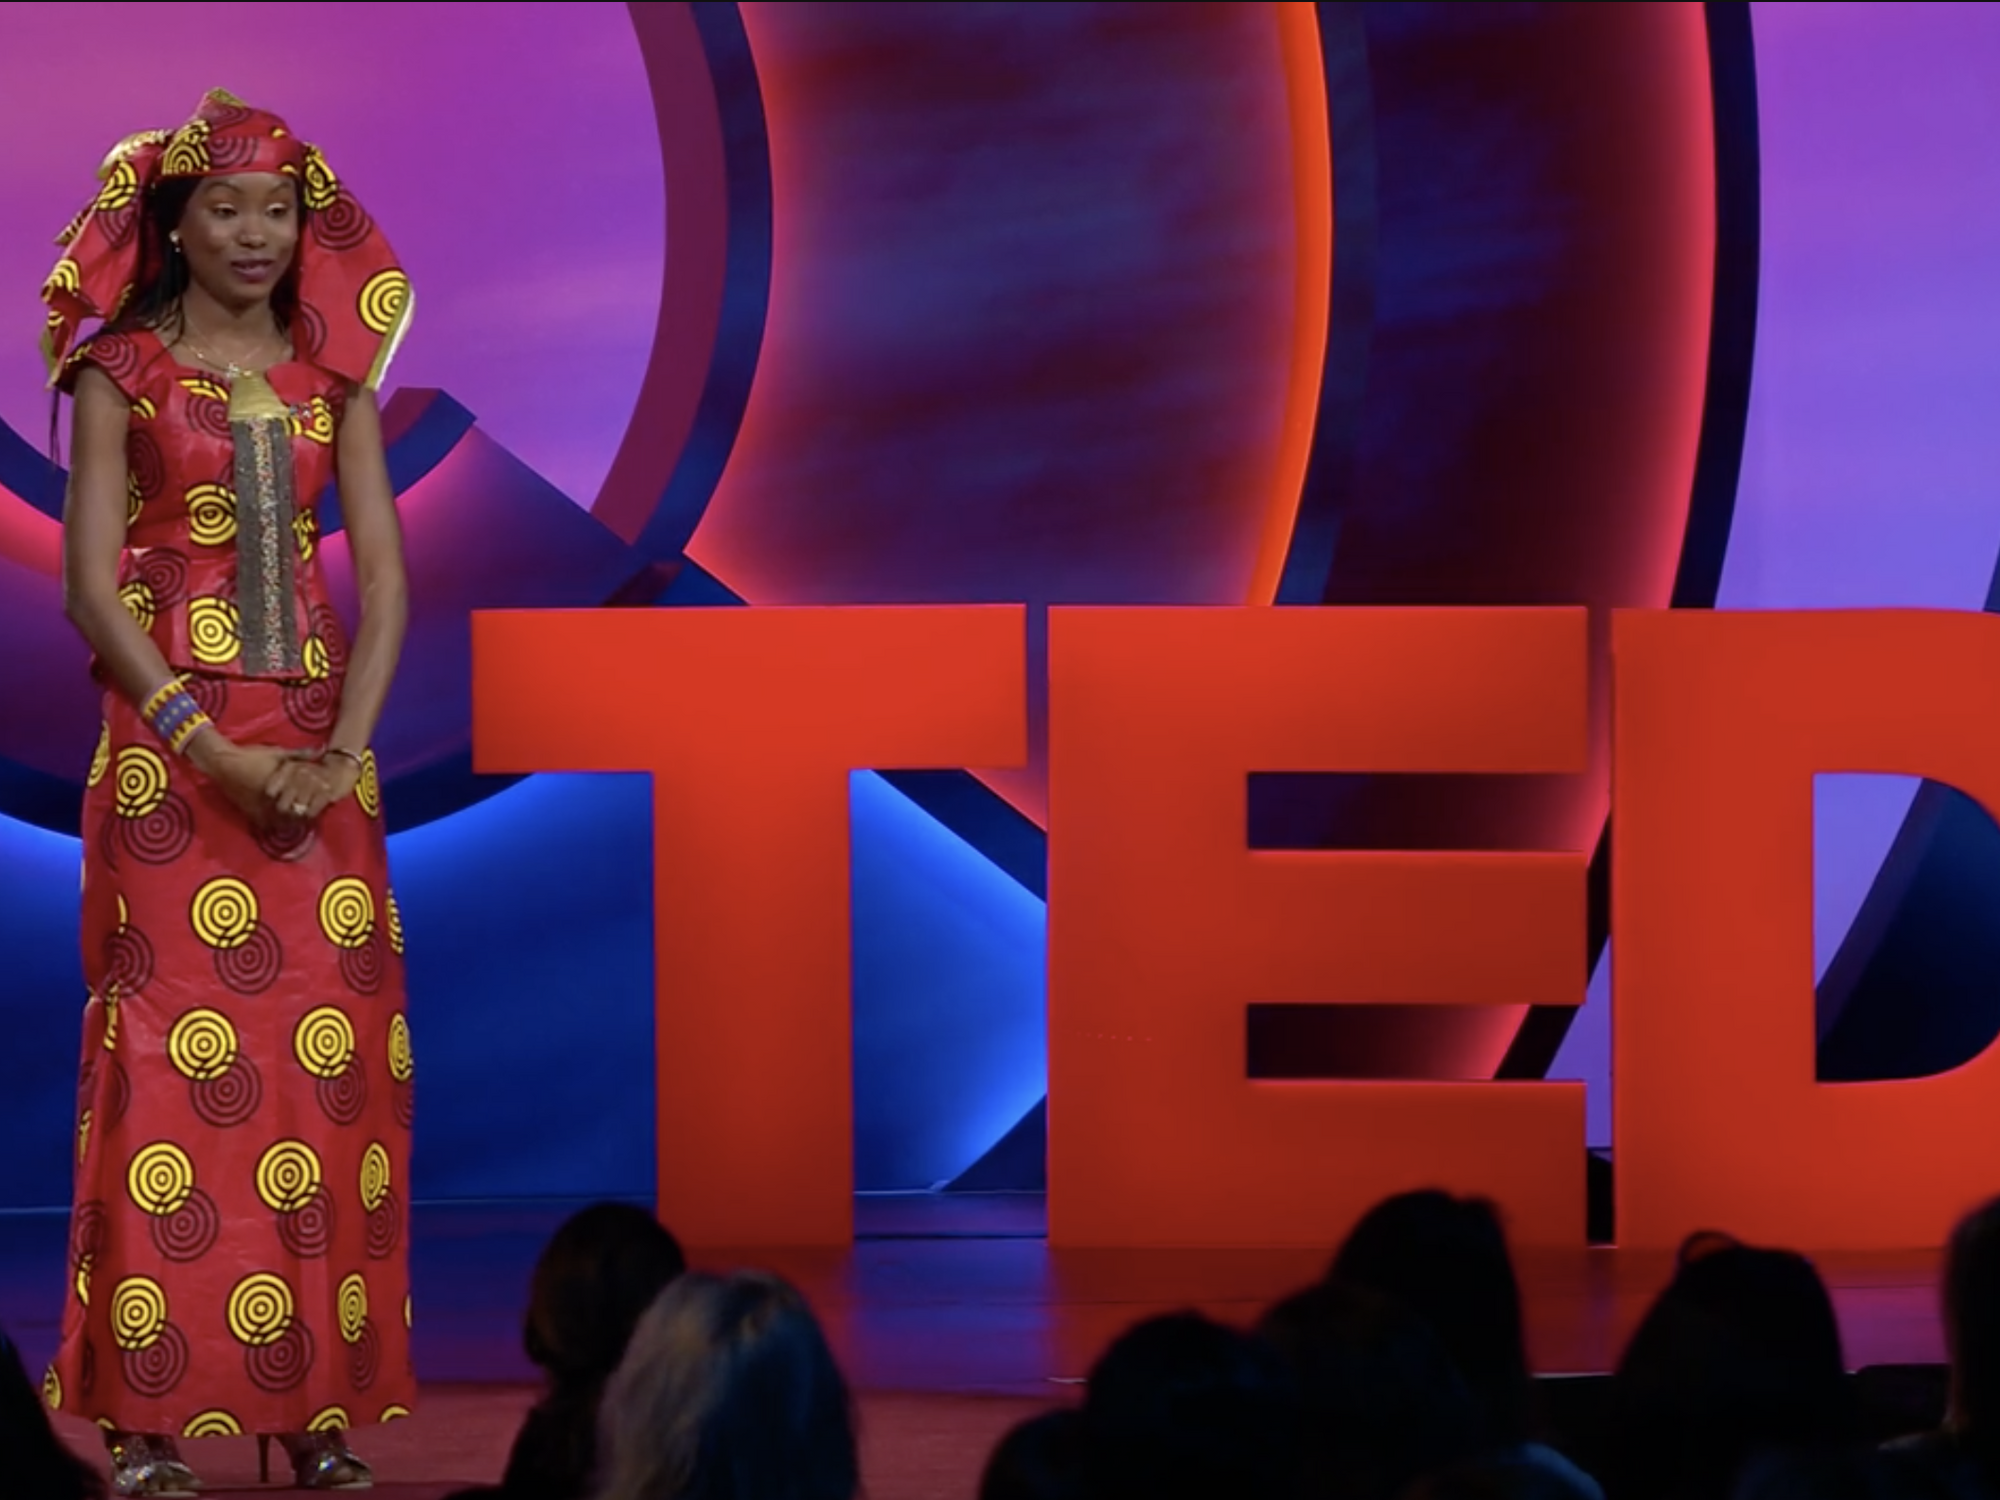 Watch Hindou Oumarou Ibrahim's  TED Talk on How Indigenous Knowledge Can Help Fight Climate Change